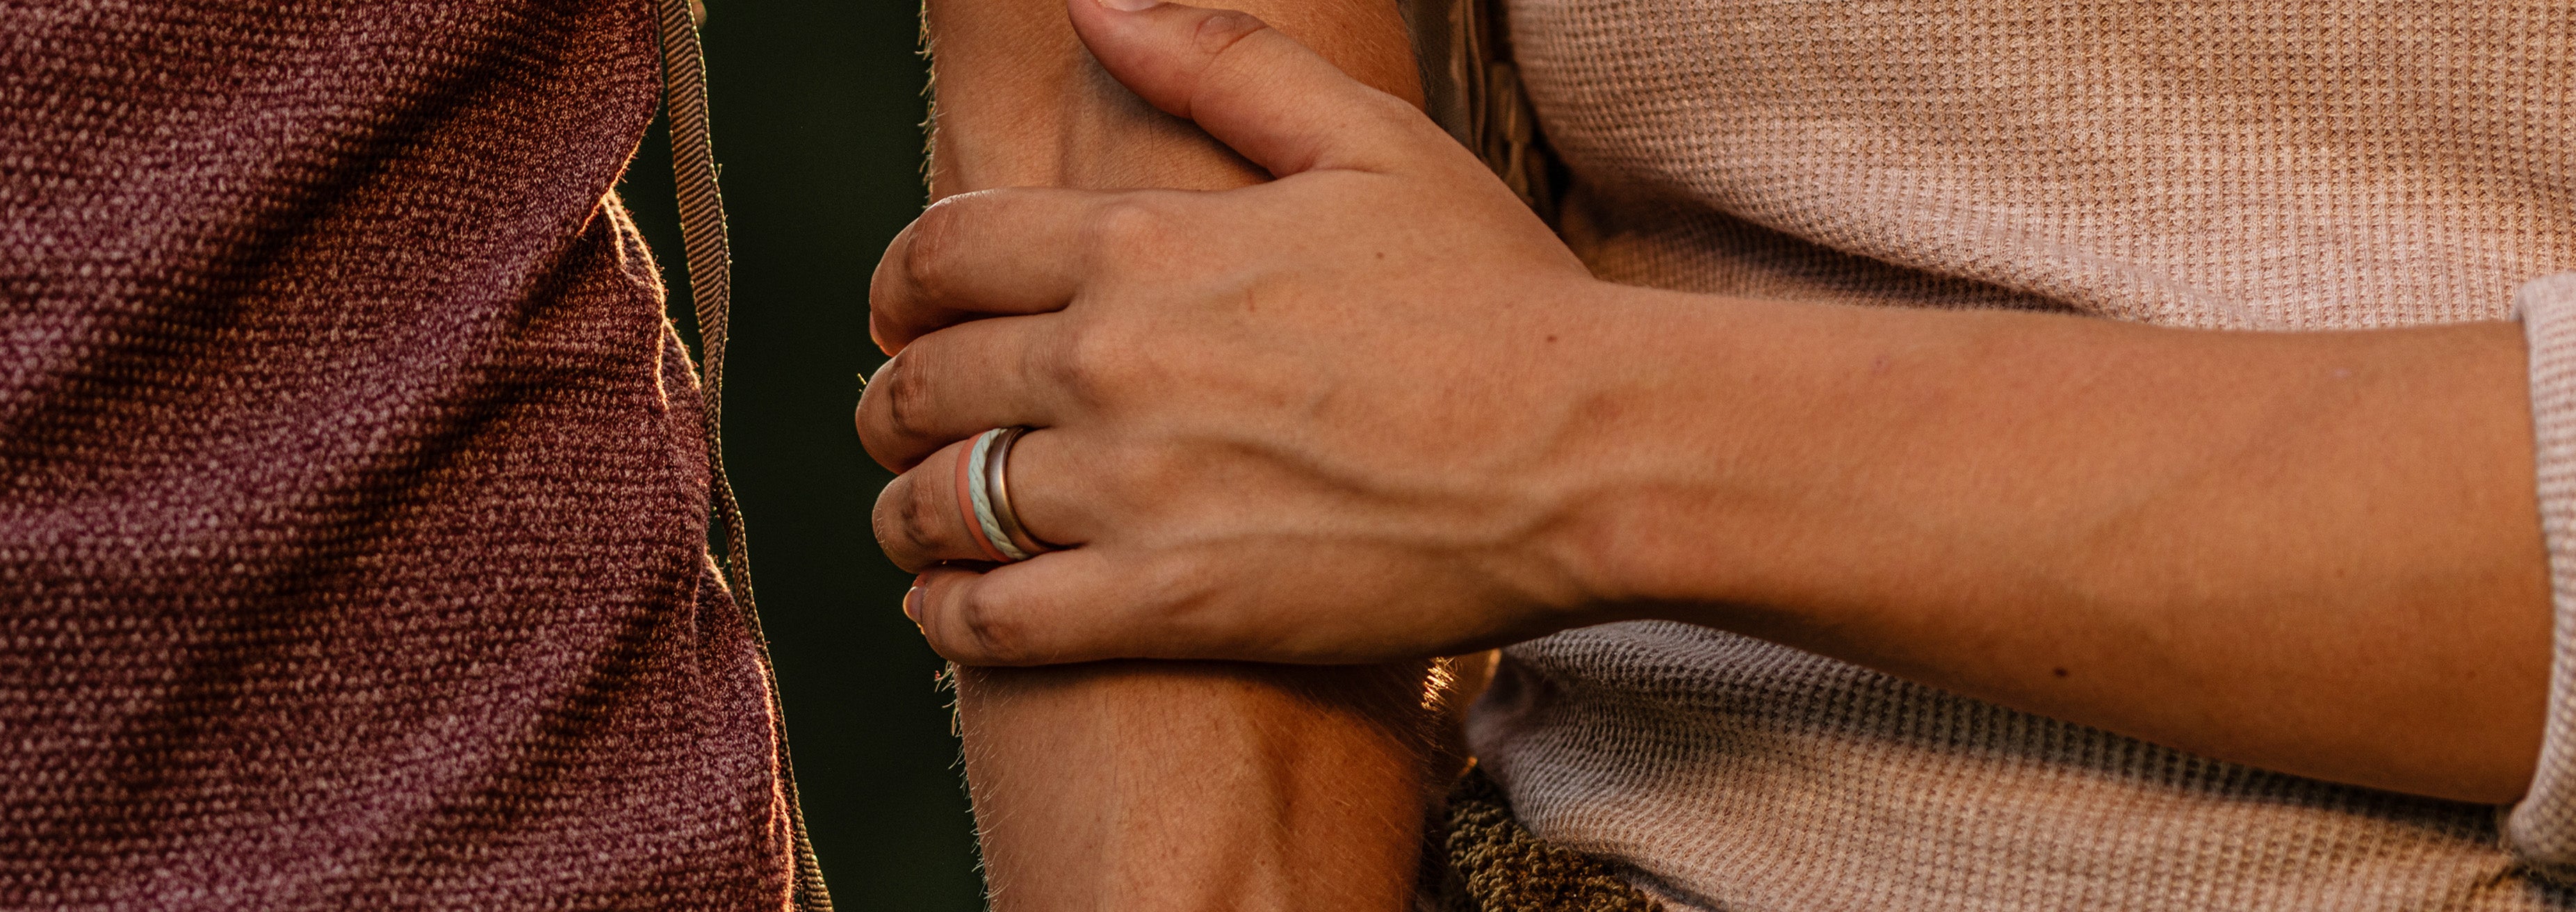 Serenity - Stackable Ring lifestyle image 3